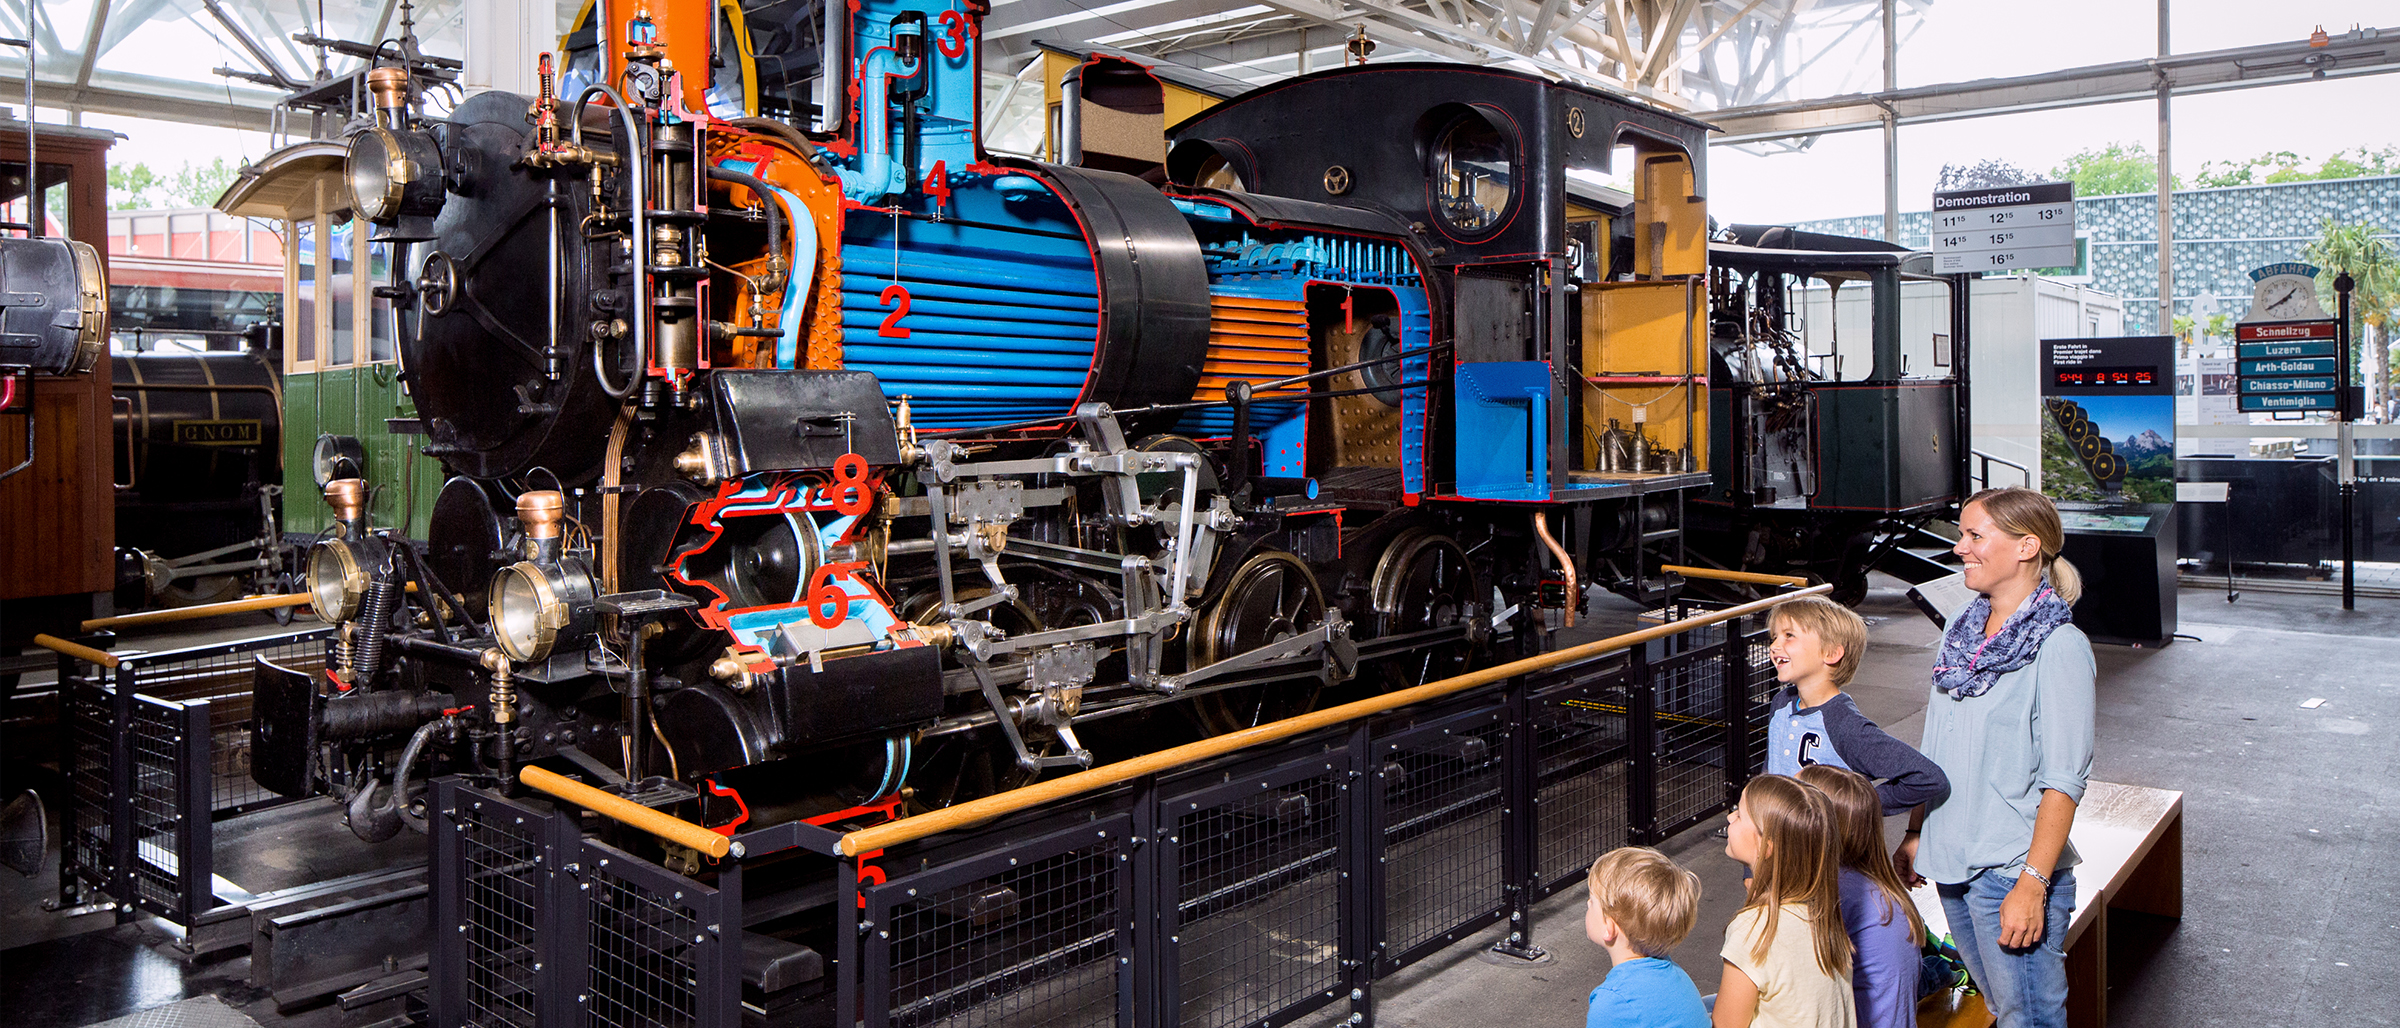 How Do Steam Engines Work?